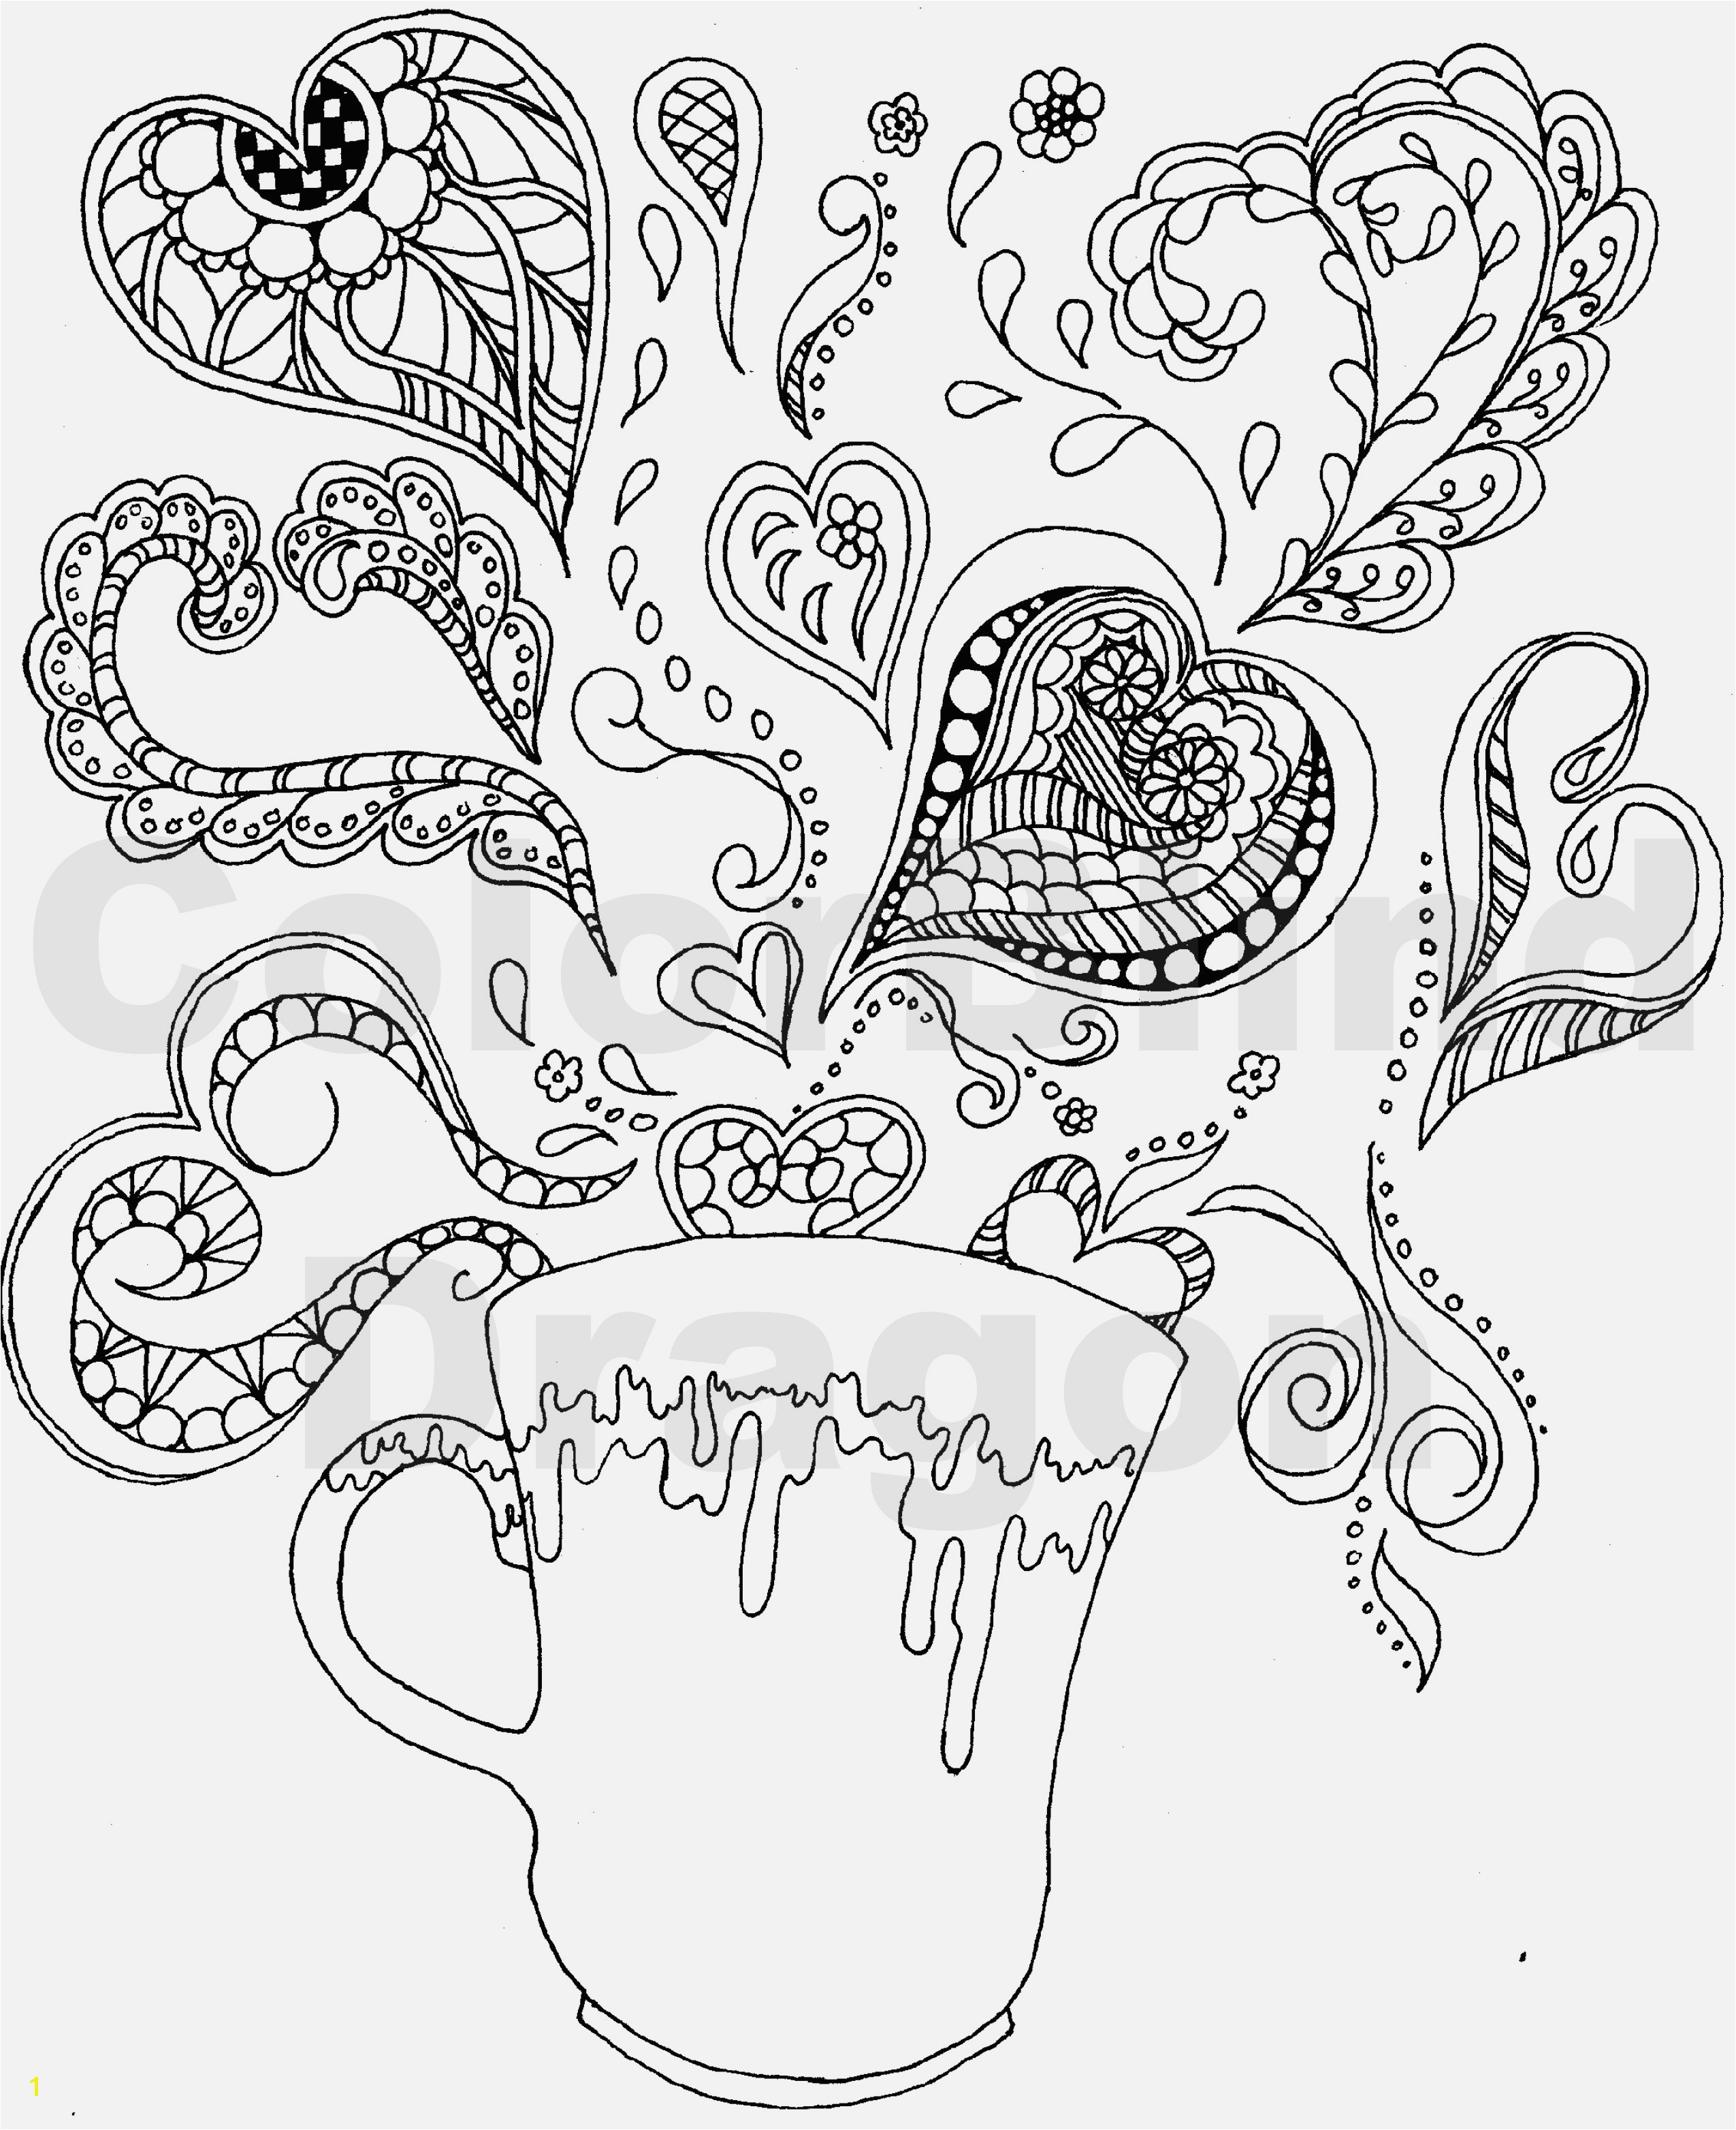 Easy Coloring Pages for Adults to Print Easy Adult Coloring Pages Printable Simple Adult Coloring Pages Best